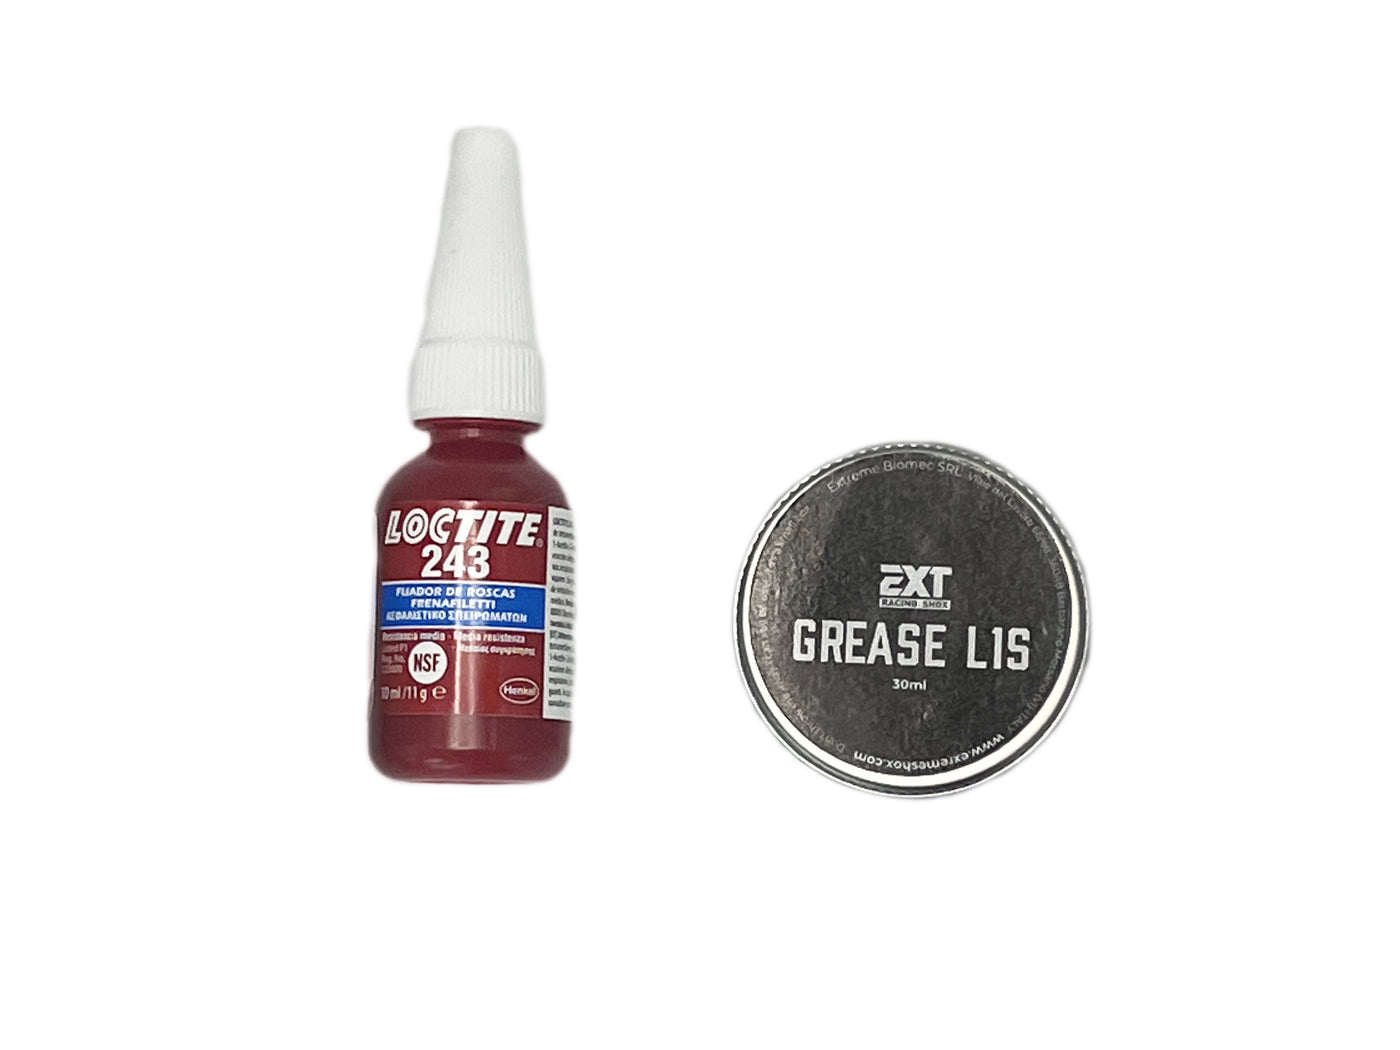 EXT Service Kit L1S Grease 30ml & Loctite 243 10ml - SK0009